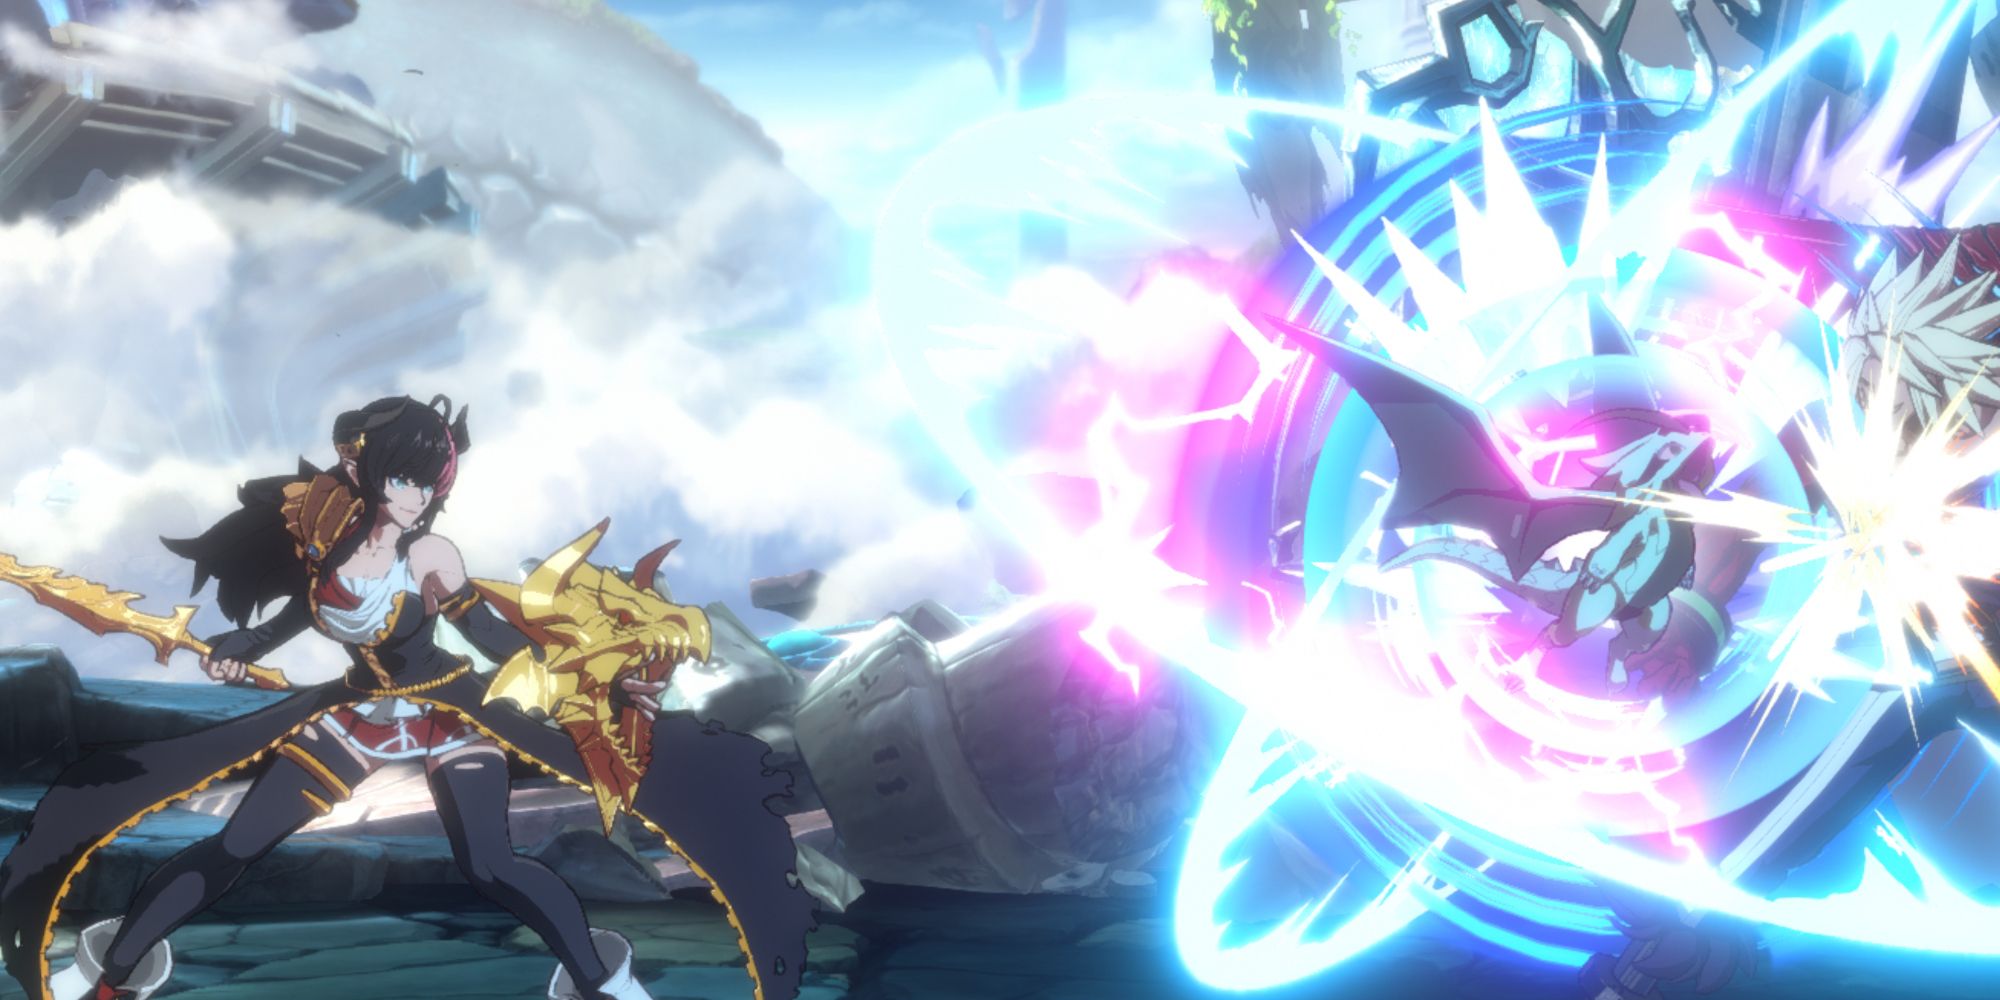 Dragon Knight performing the MP Special Move Summon Astra in DNF Duel